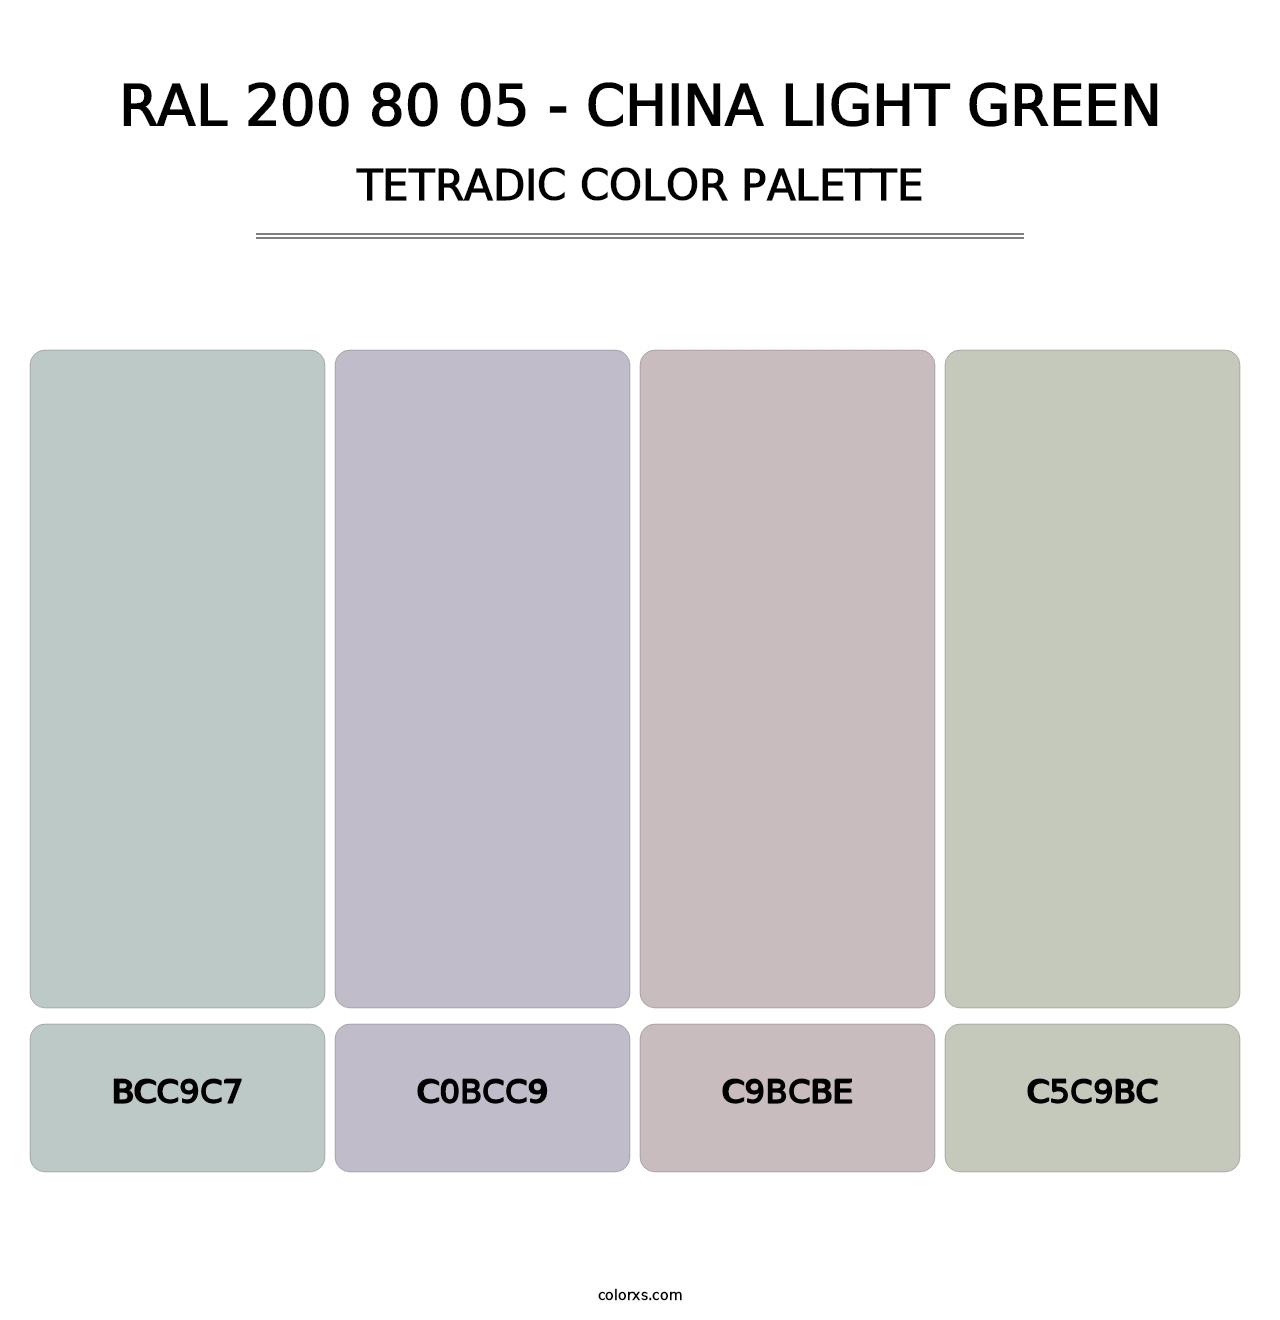 RAL 200 80 05 - China Light Green - Tetradic Color Palette